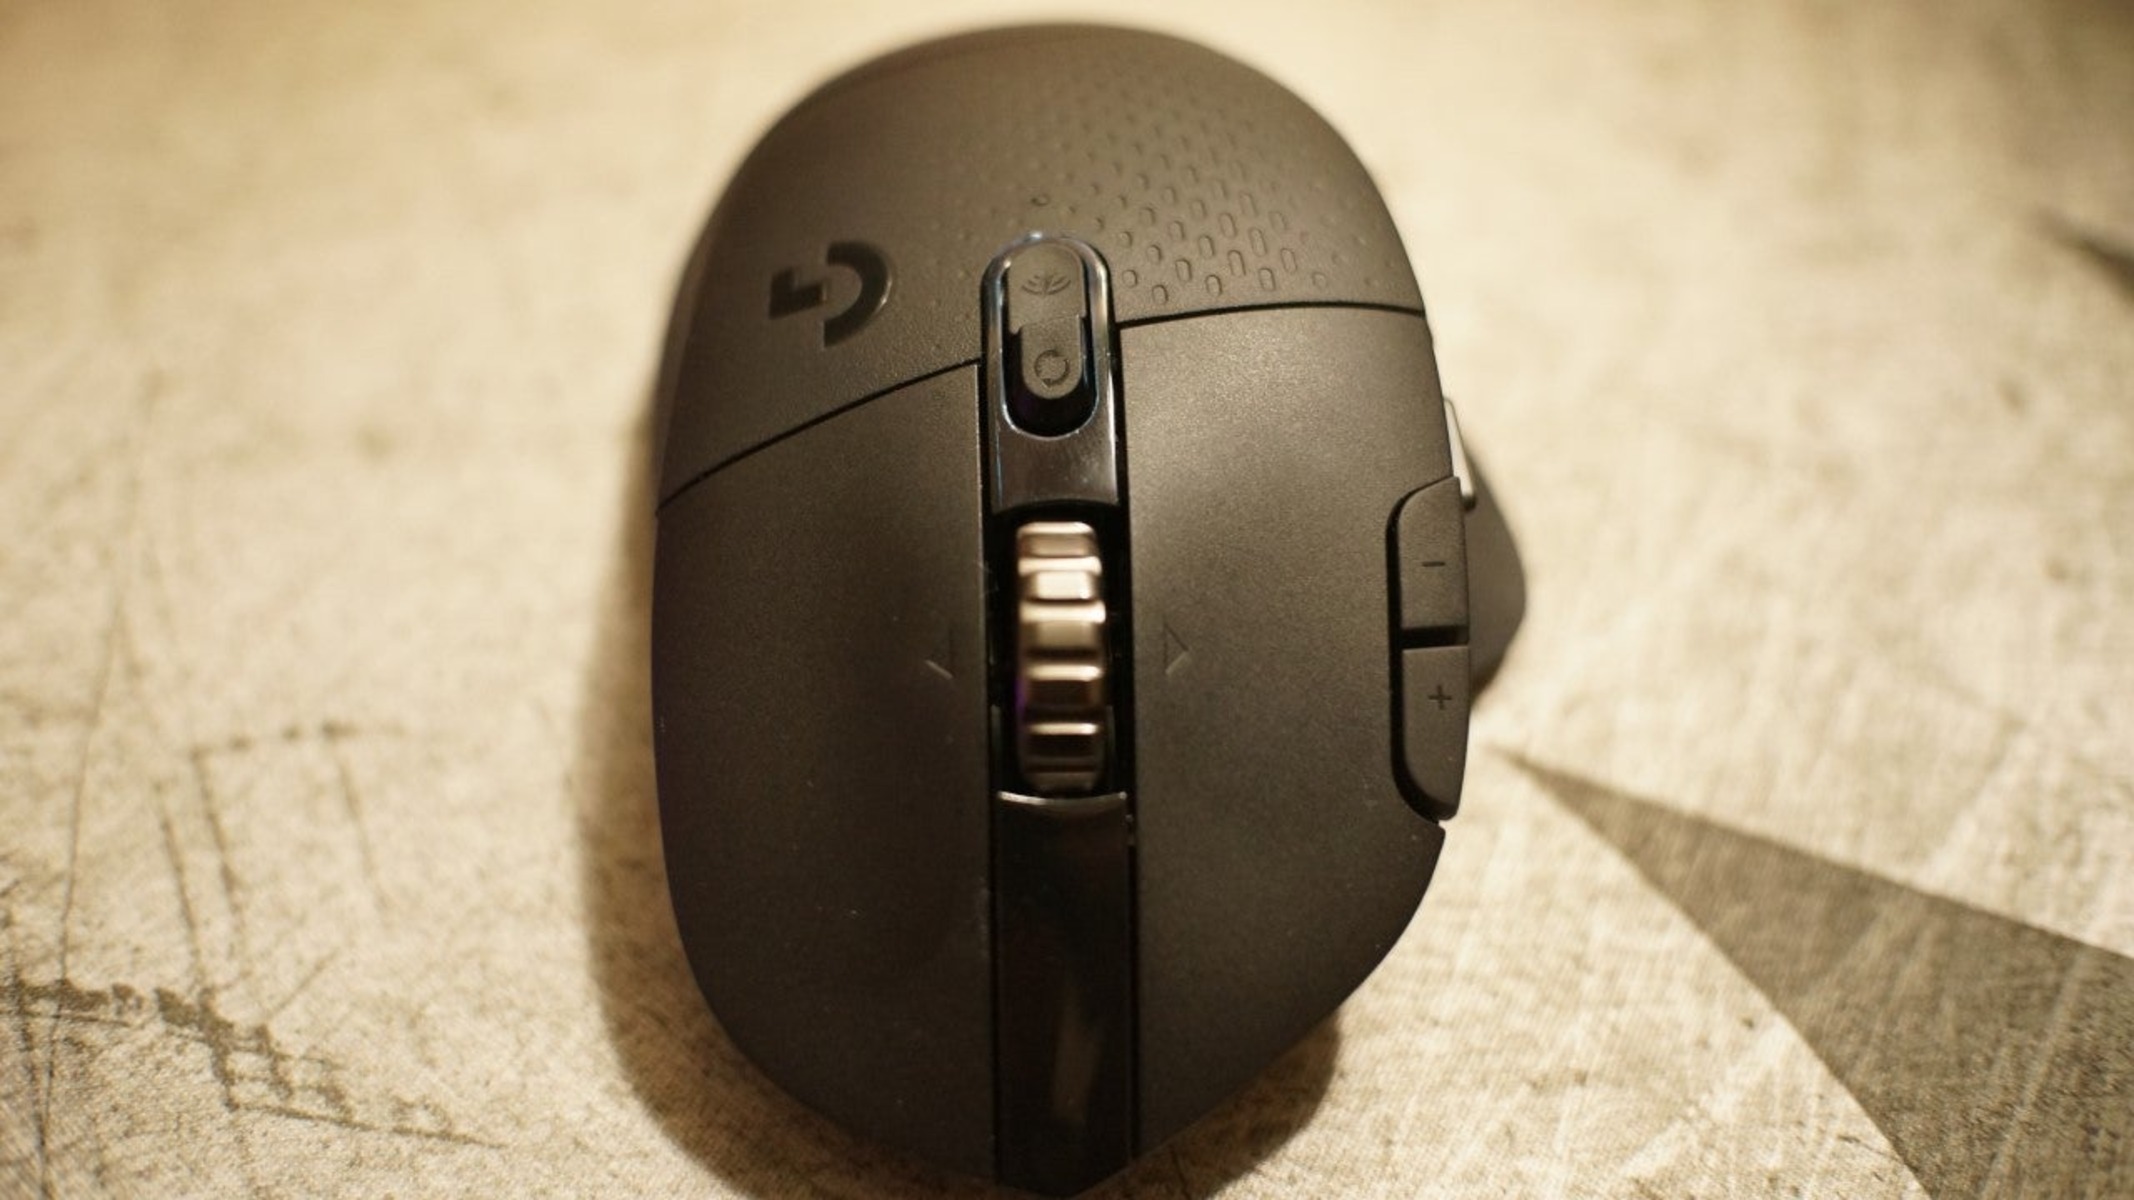 How To Set Macros On Logitech Gaming Mouse